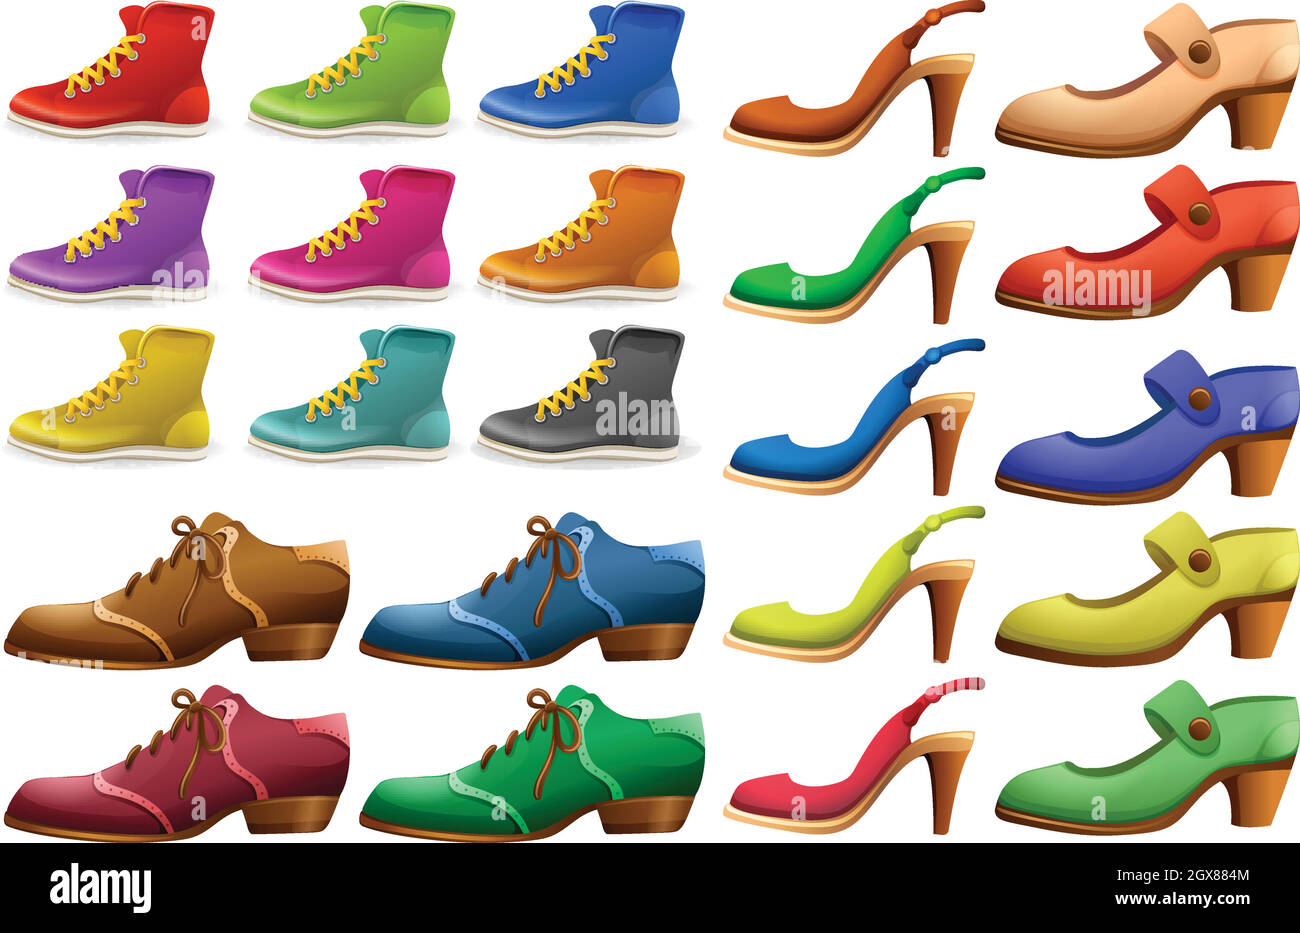 Different designs of shoes Stock Vector